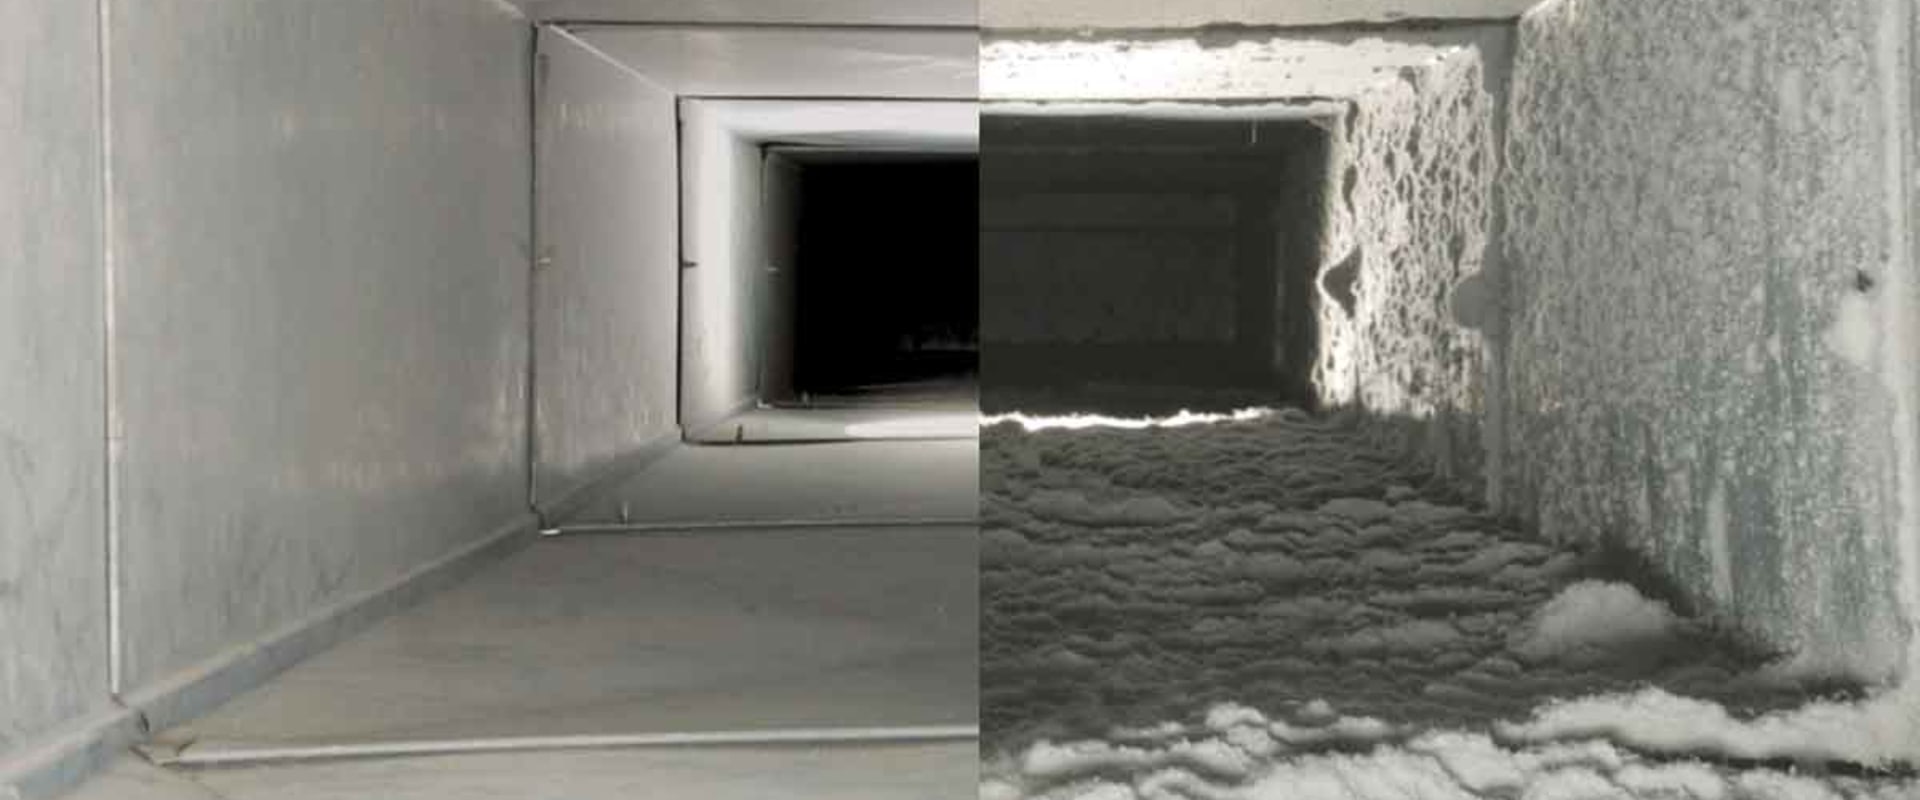 How to Ensure Your Contractor is Licensed and Insured for Duct Sealing Services in Miami-Dade County, FL